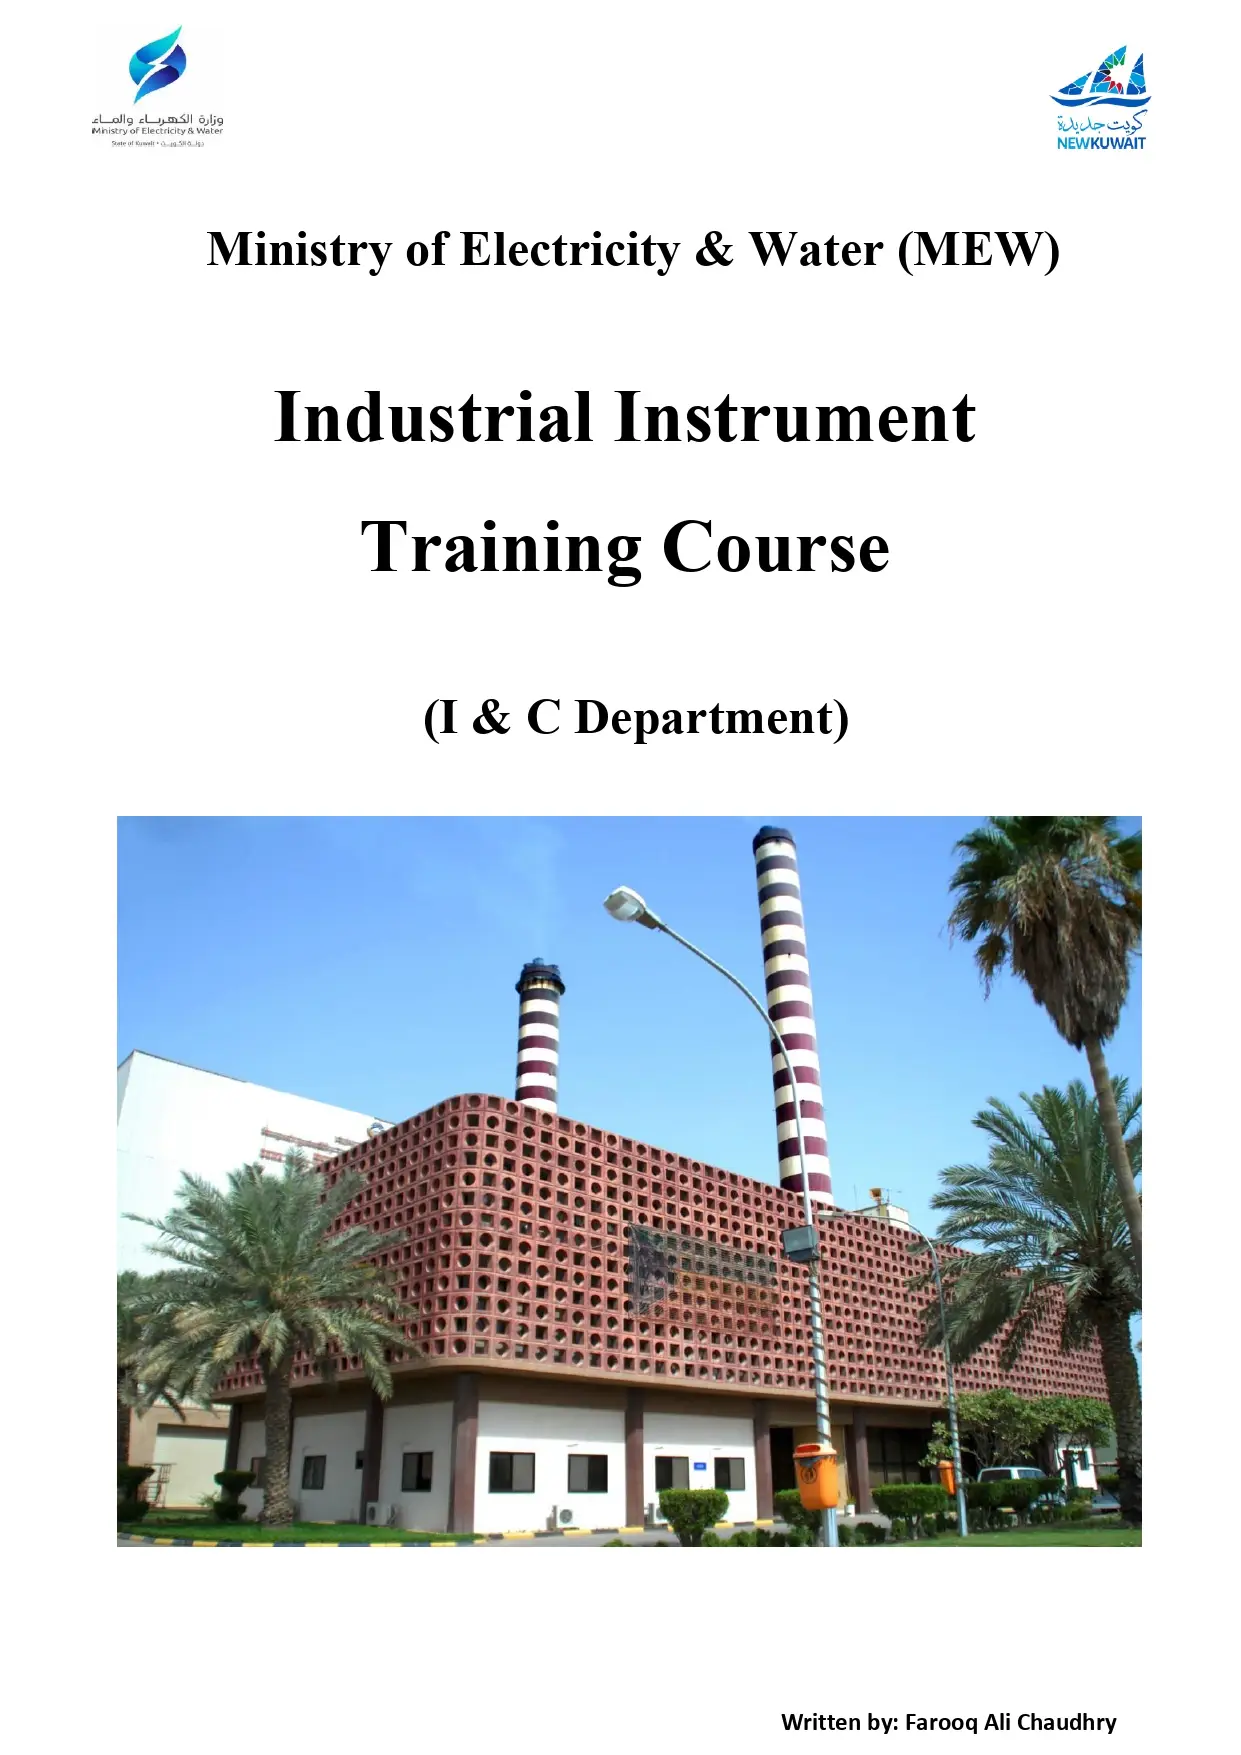 Industrial Instrument Training Course